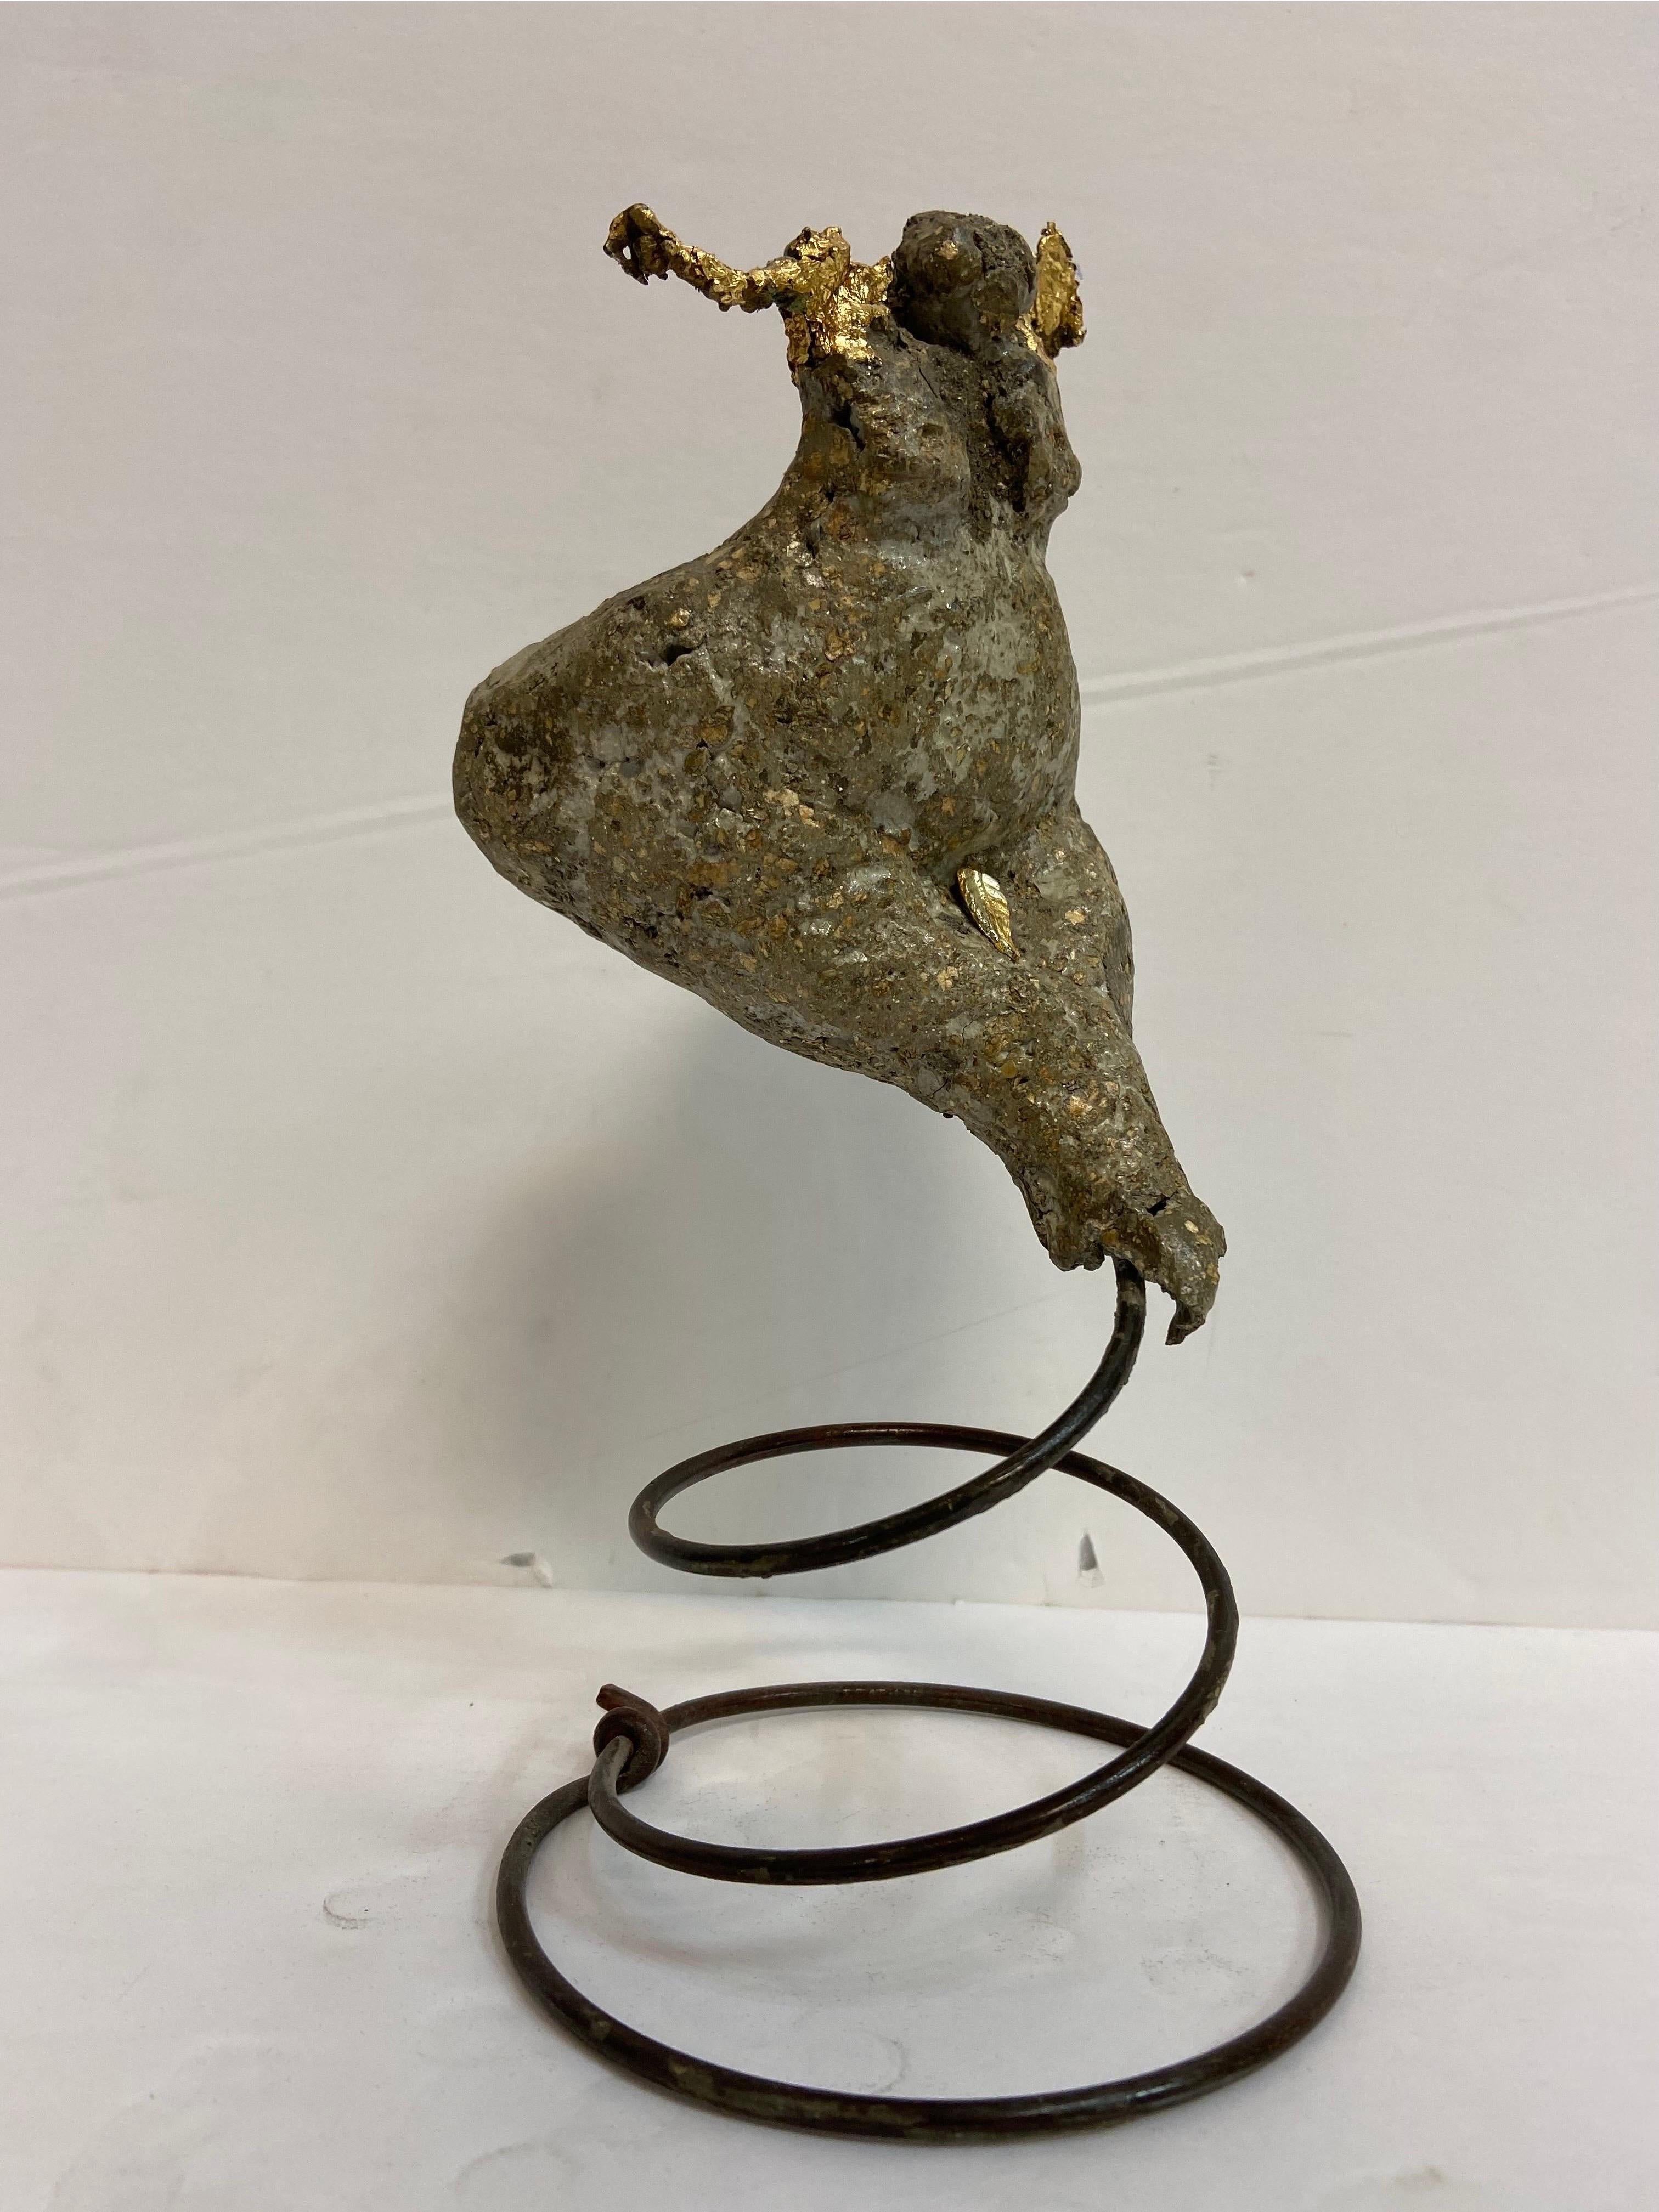 A whimsical and powerful representation of the female form by Contemporary American artist Larry McLaughlin (born 1956). This sculpture is constructed of concrete and heightened with gold leaf. The sculpture is set atop a coiled metal spring. The